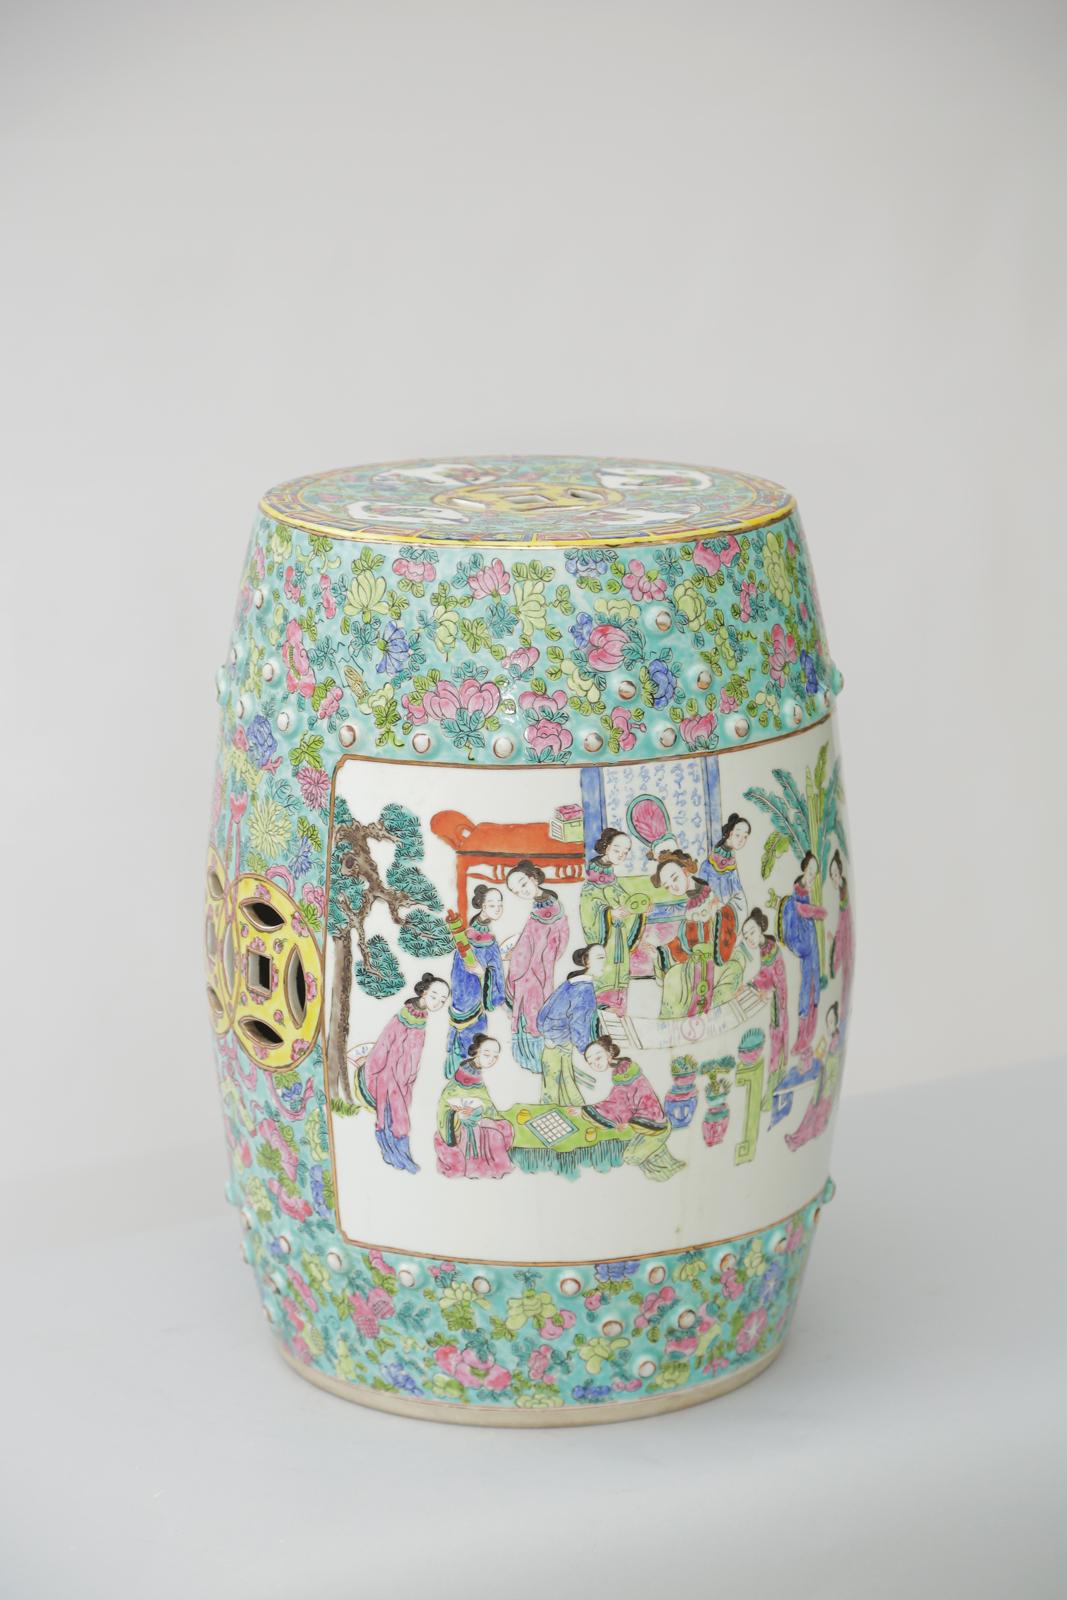 Famille Rose garden seat, of handpainted porcelain, its traditional studded drum shape is intricately decorated in a pastel palette of blues, greens, yellows, and pinks, its body decorated with a figural scene of court life, opposite a pair of